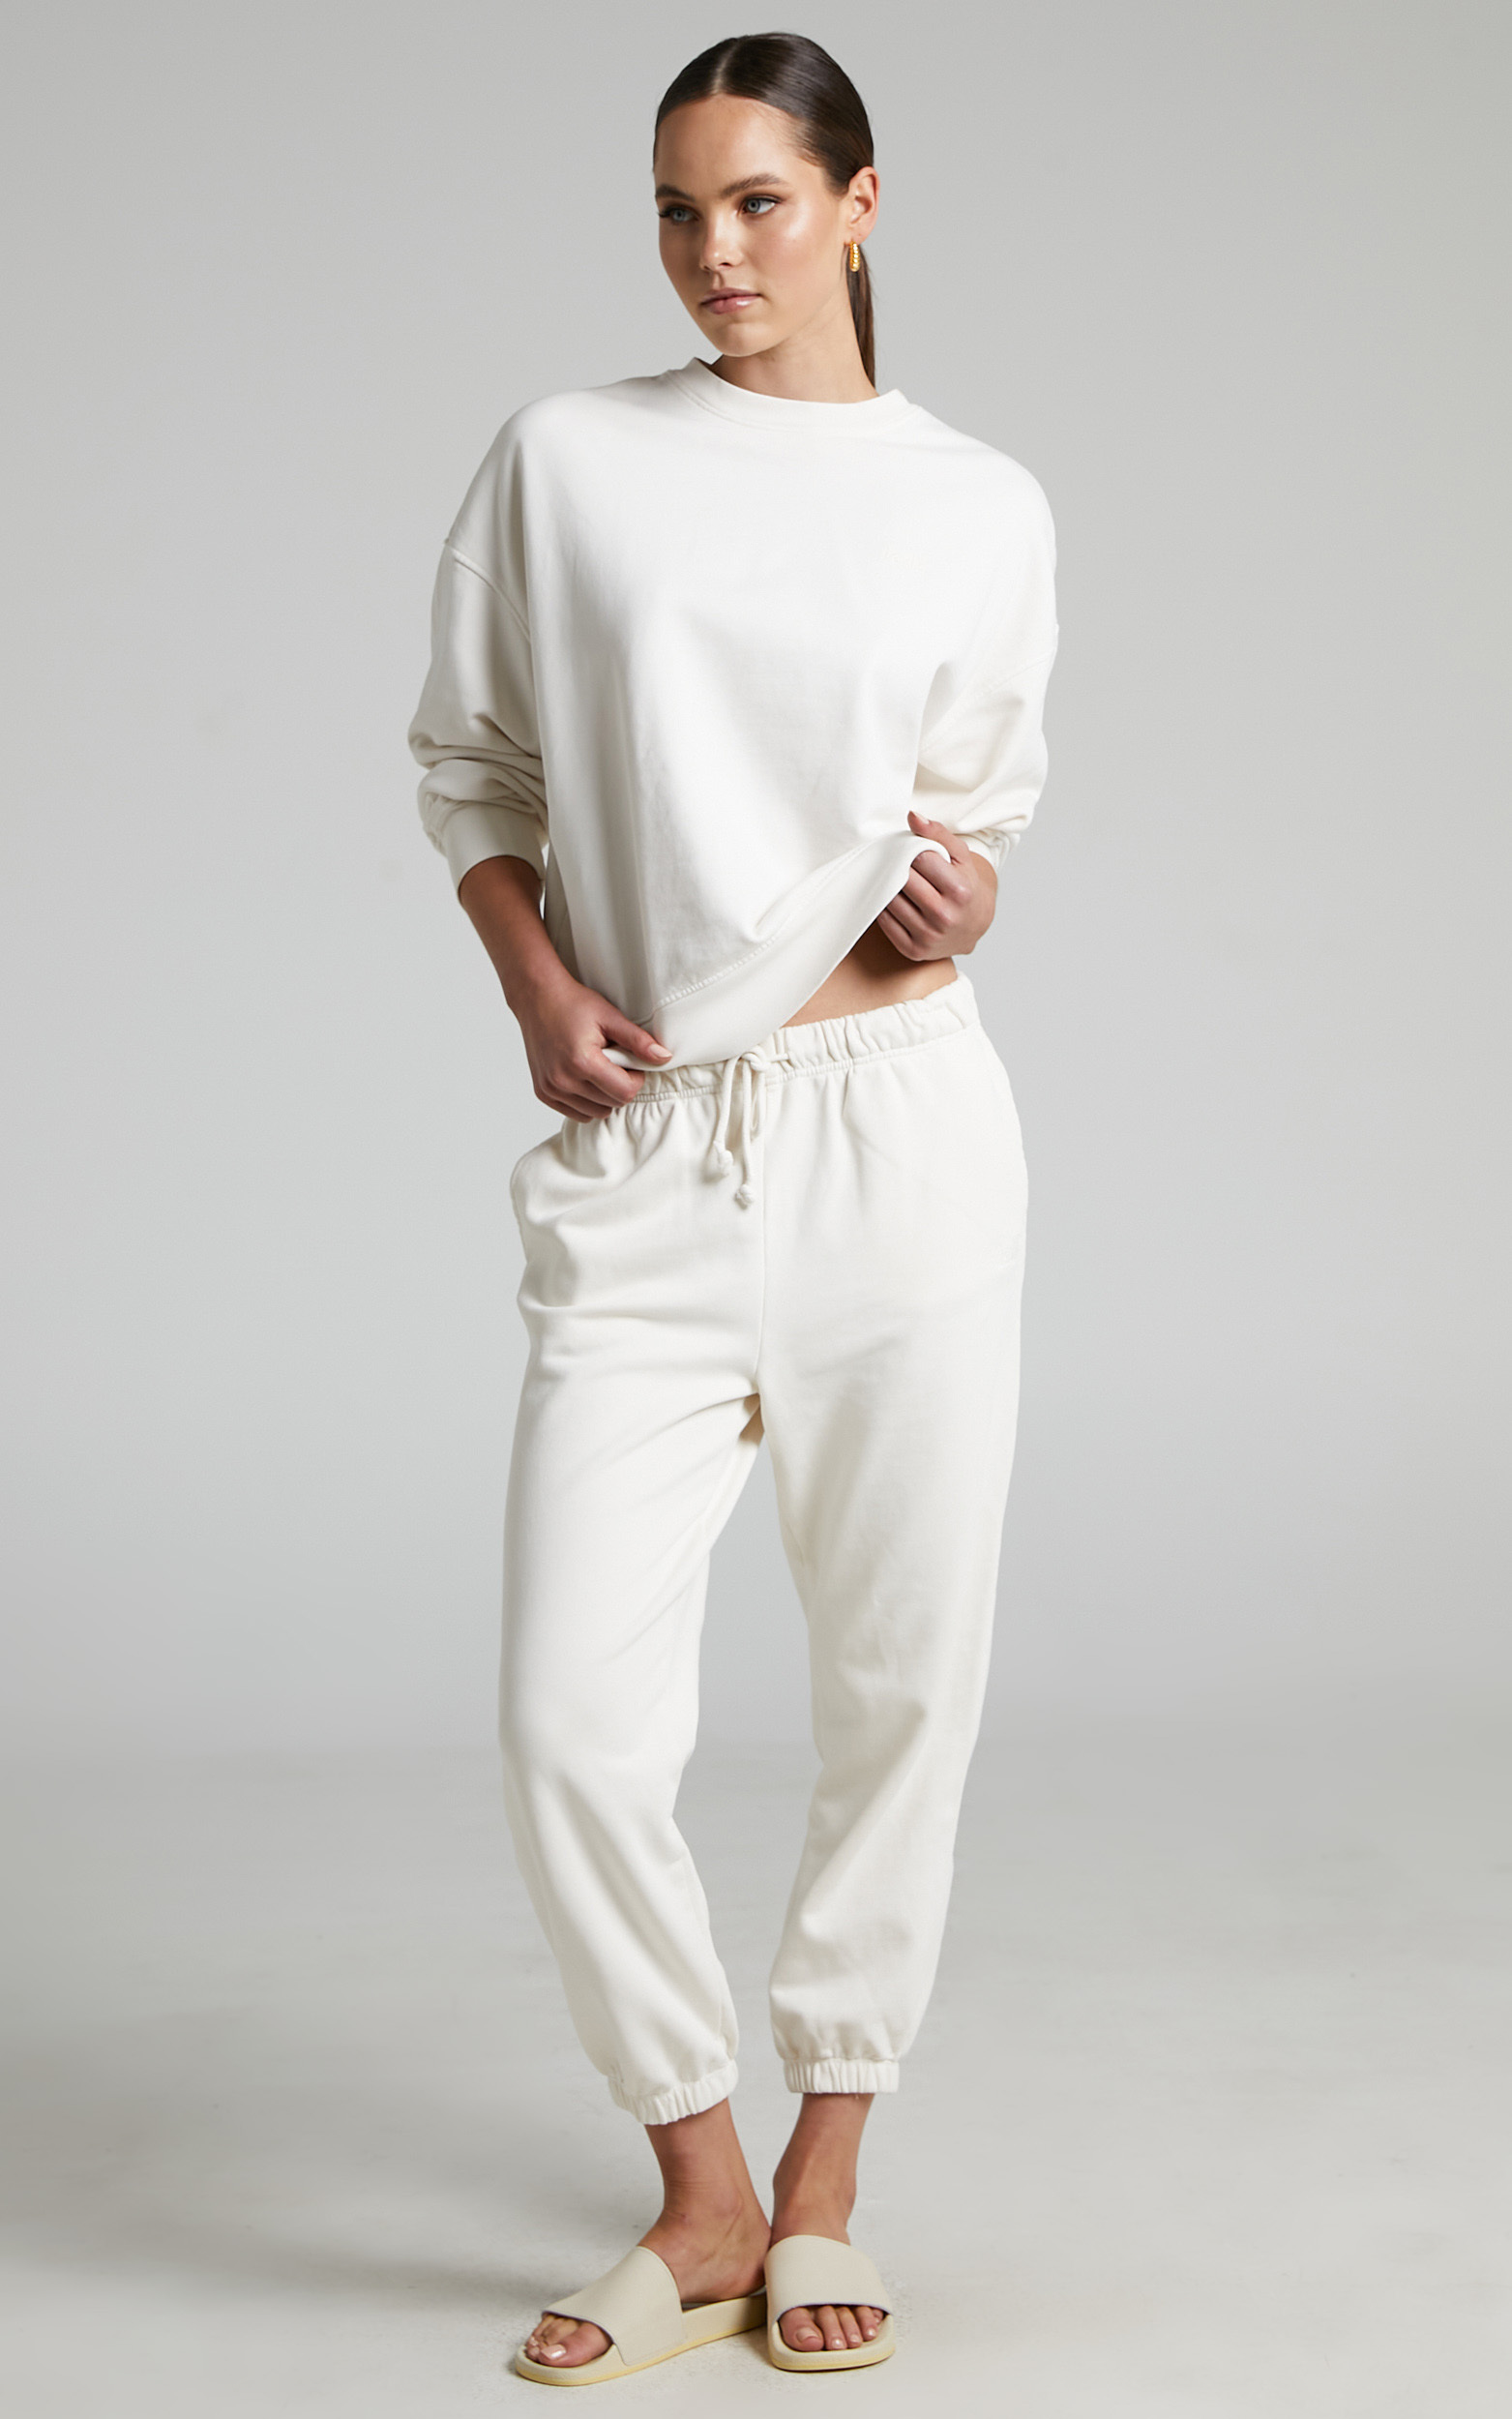 Levi's - Low Rise WFH Trackpants in Sugar Swizzle - L, CRE1, hi-res image number null